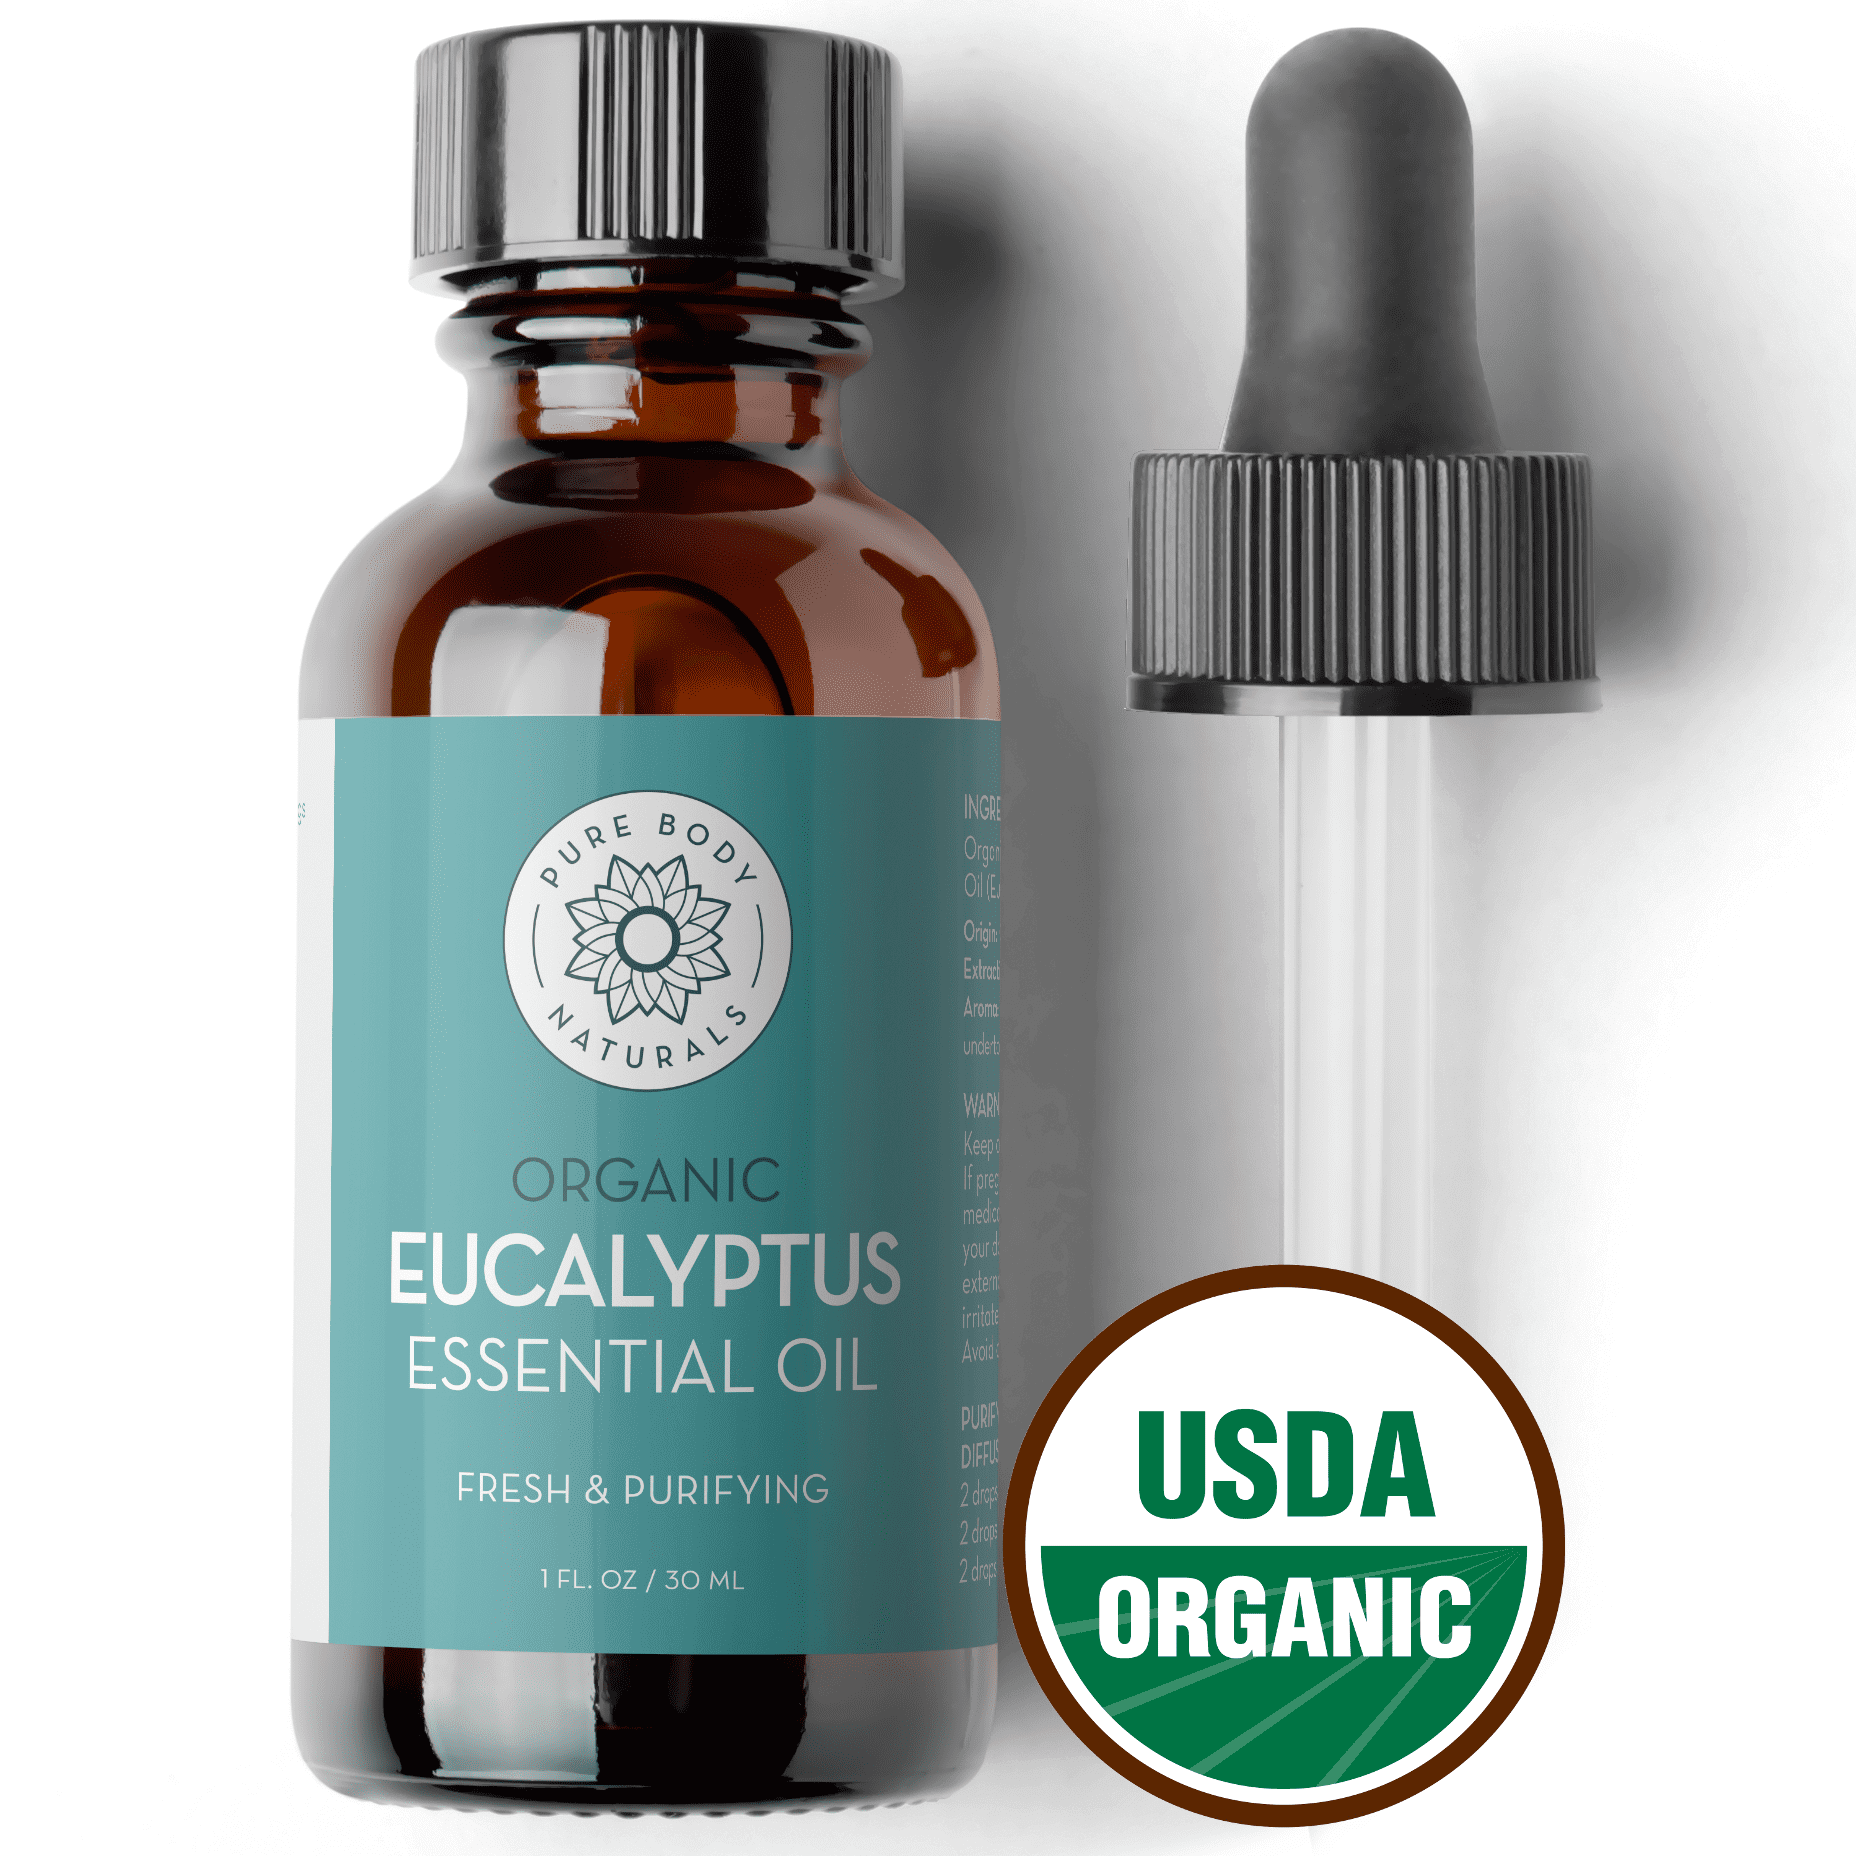 Organic Eucalyptus Oil for Hair, Skin, Undiluted Therapeutic Grade 1fl oz by Pure Body Naturals